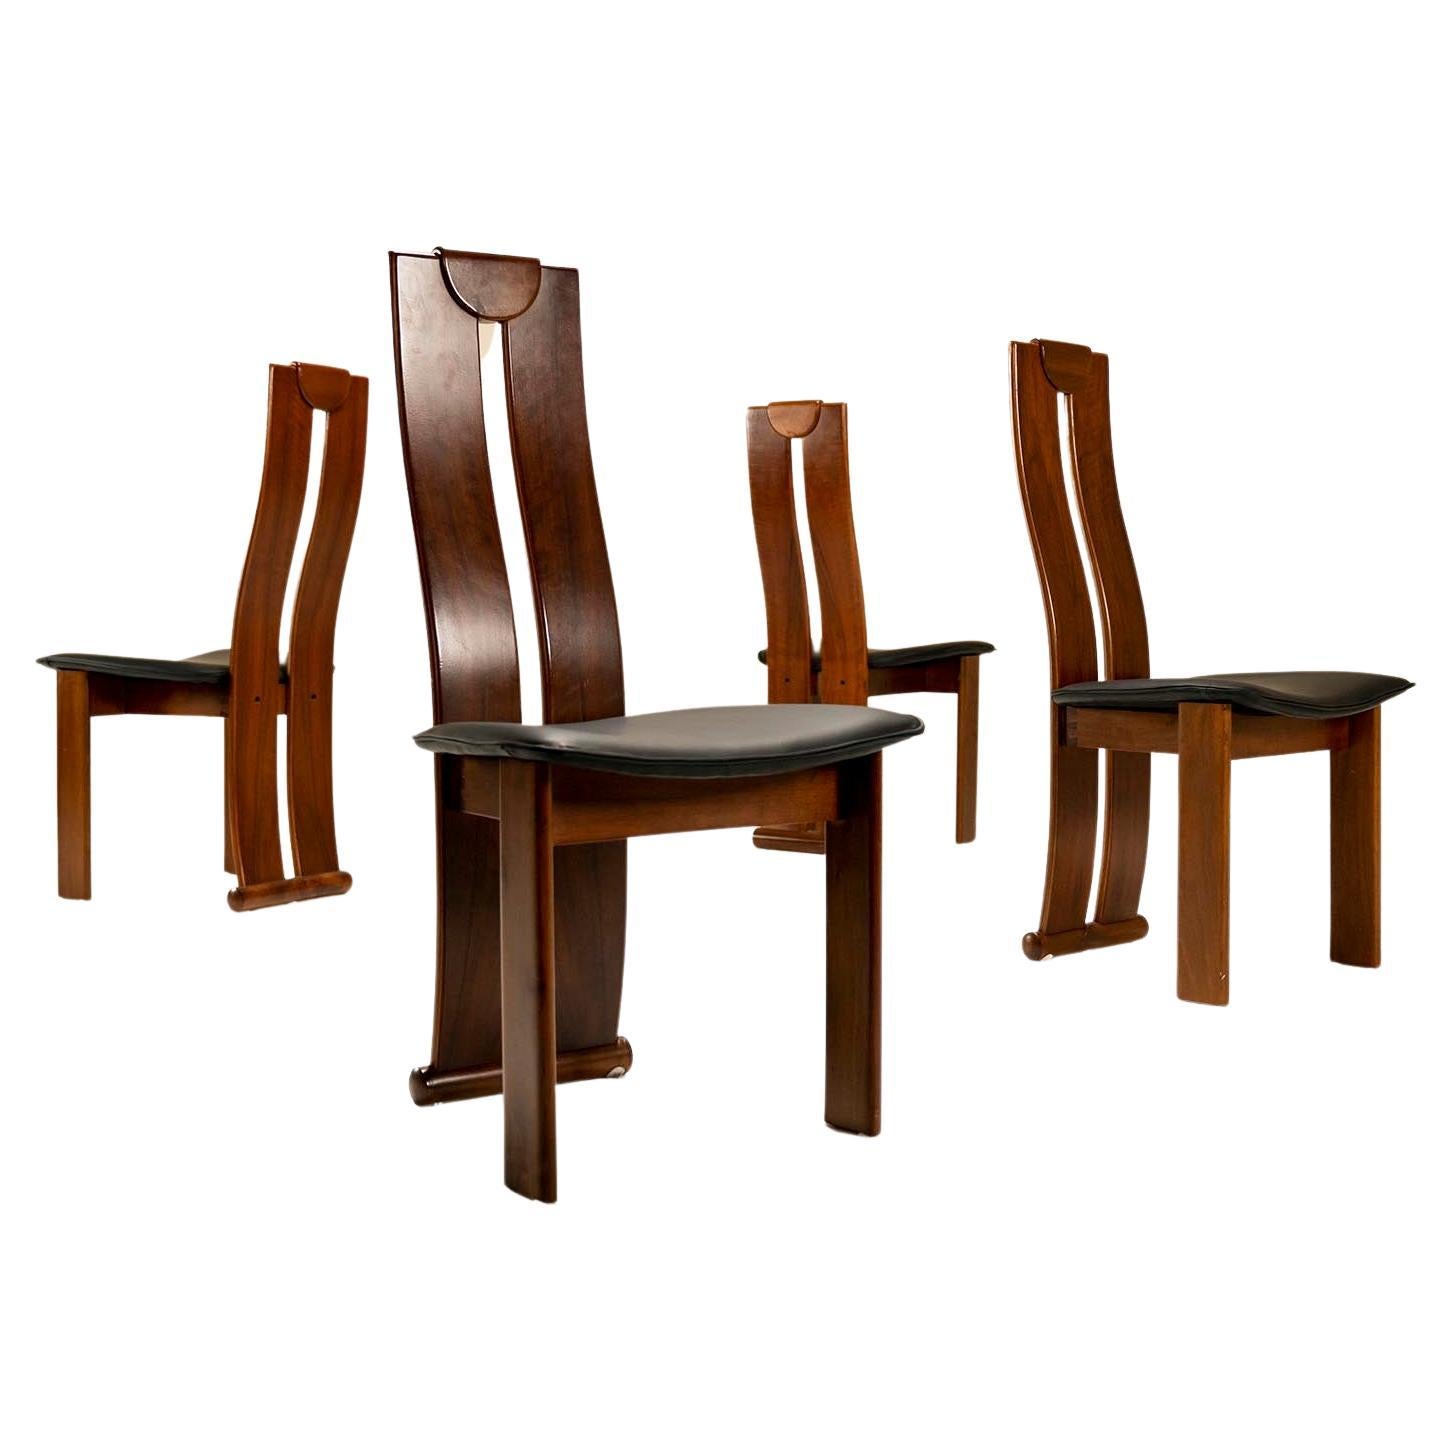 Set of Four Dining Chairs in Walnut in the Style of Scarpa, Italy 1970s For Sale